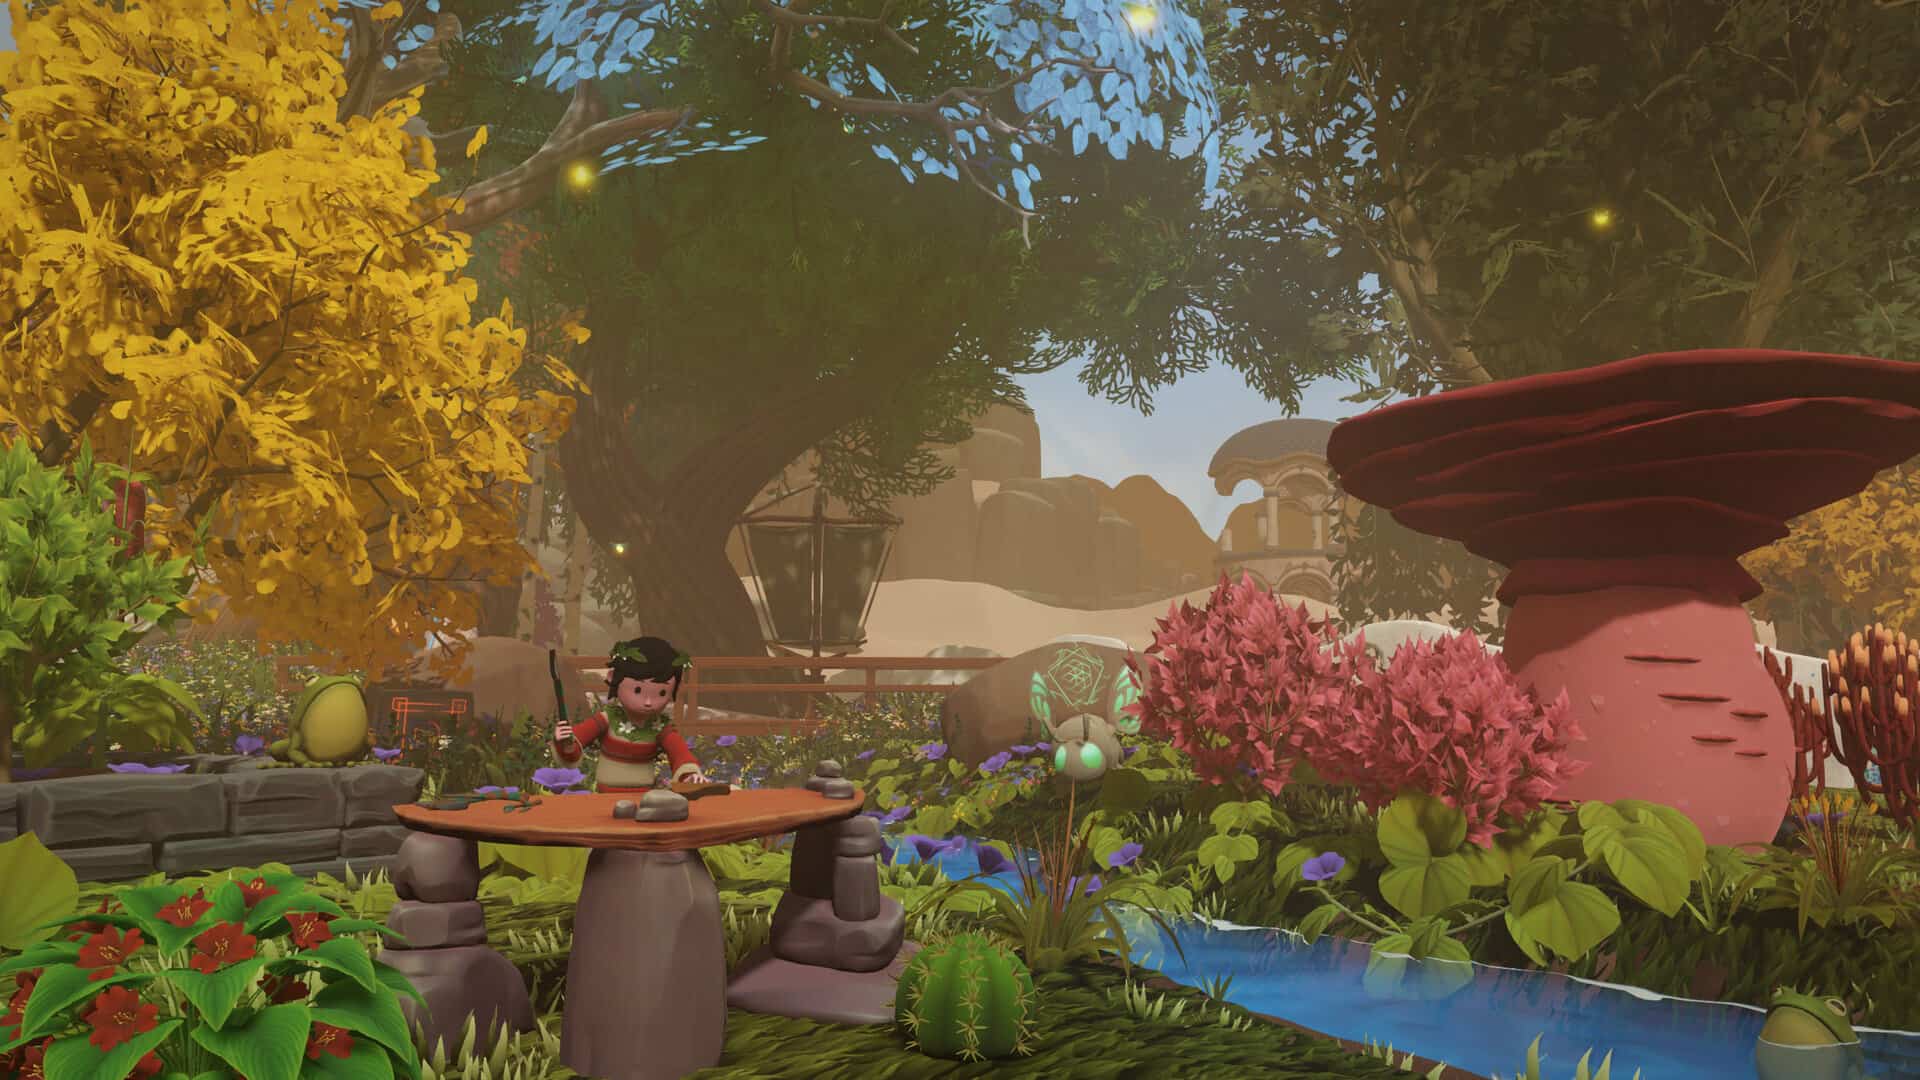 Zombie Garden vs Plants Defence -Battle Craft and Survival Simulator Game  for Nintendo Switch - Nintendo Official Site